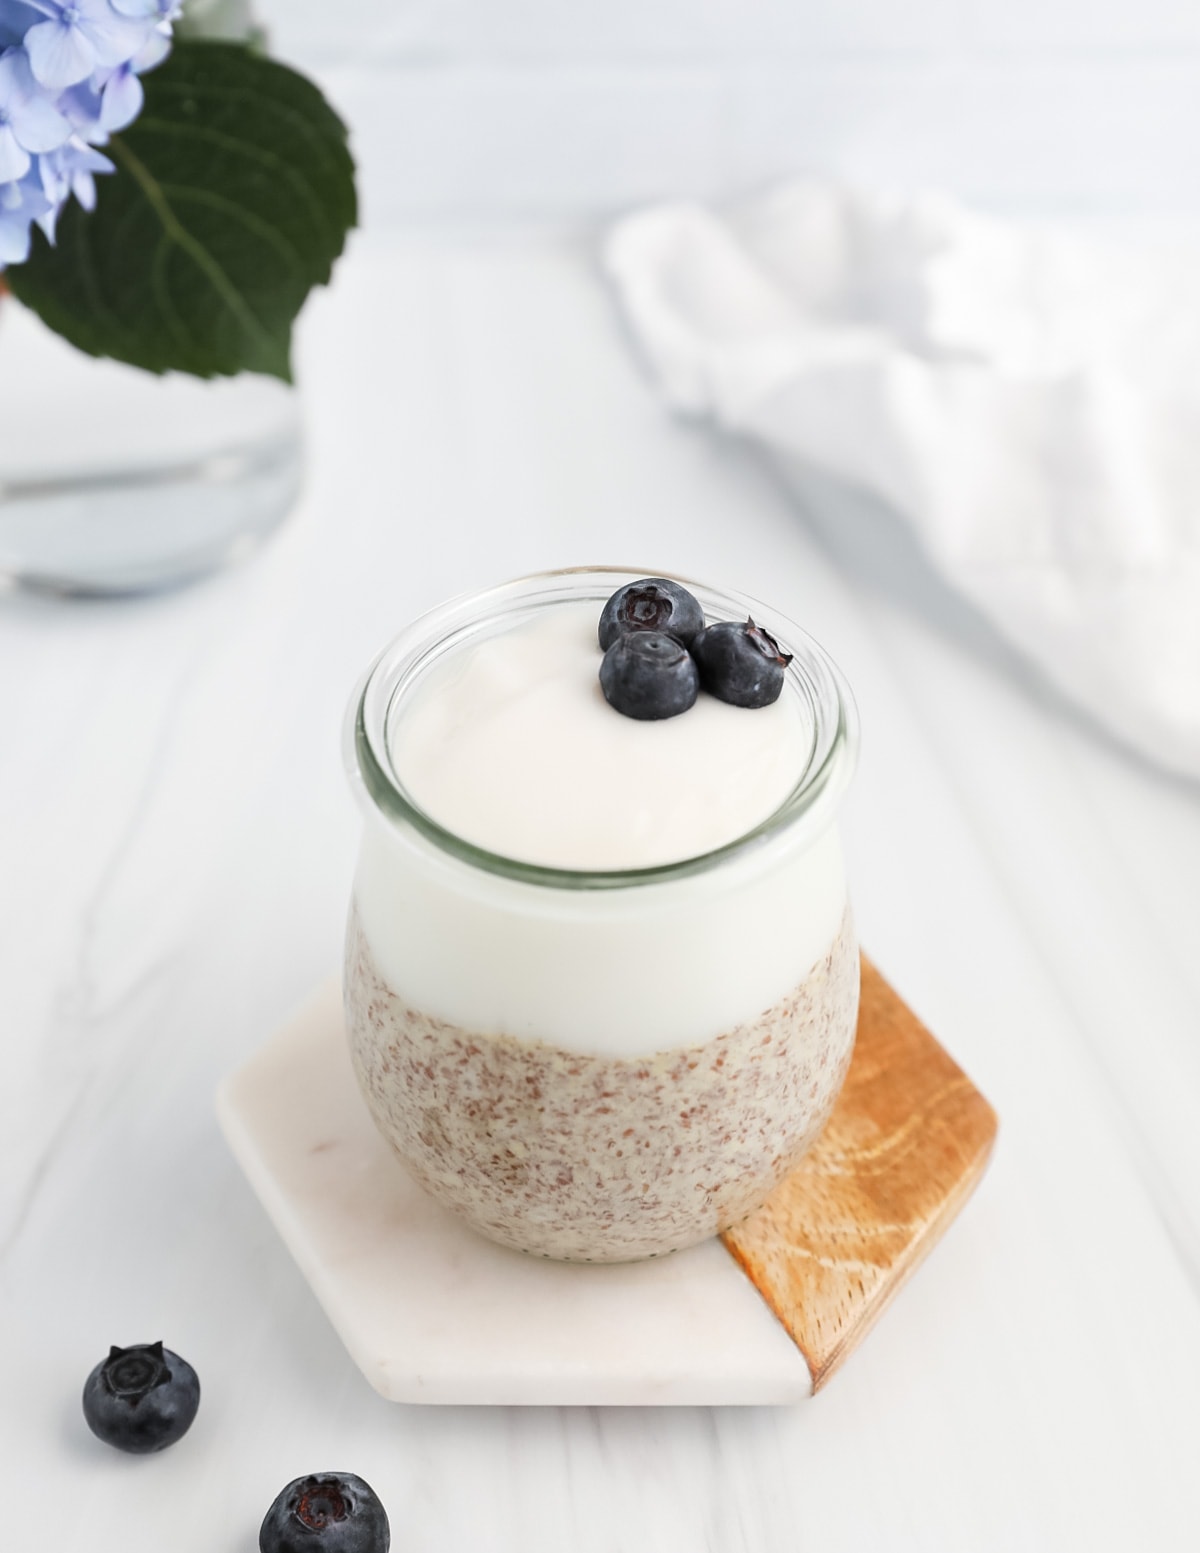 A small jar filled with flax pudding and yogurt with blueberries on top.